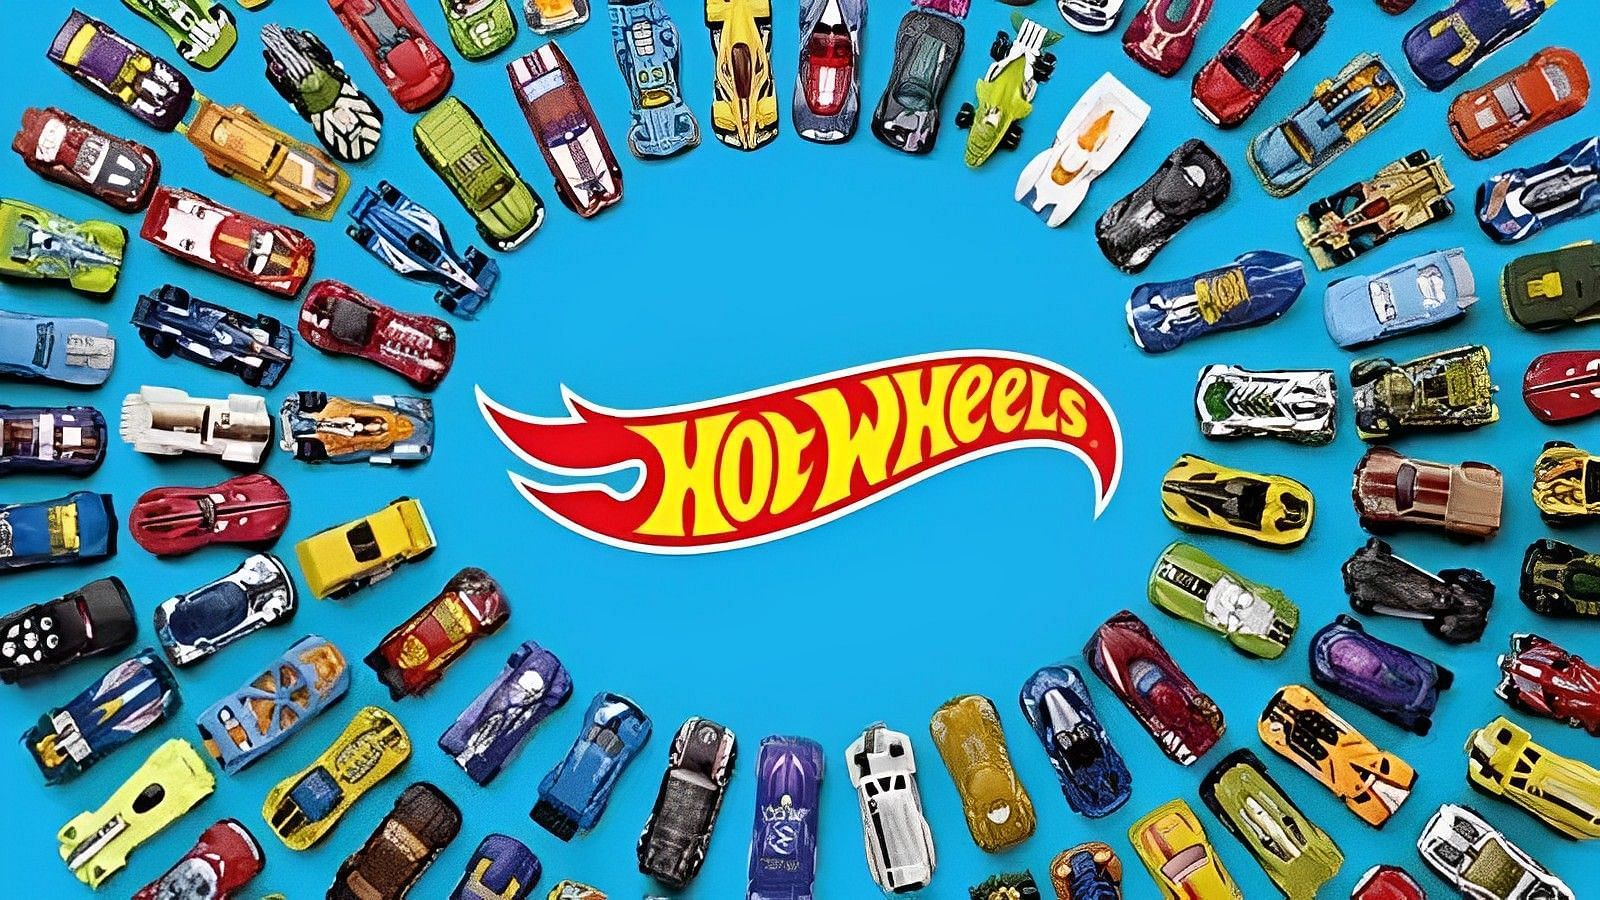 Image of Hot Wheels via Getty Images